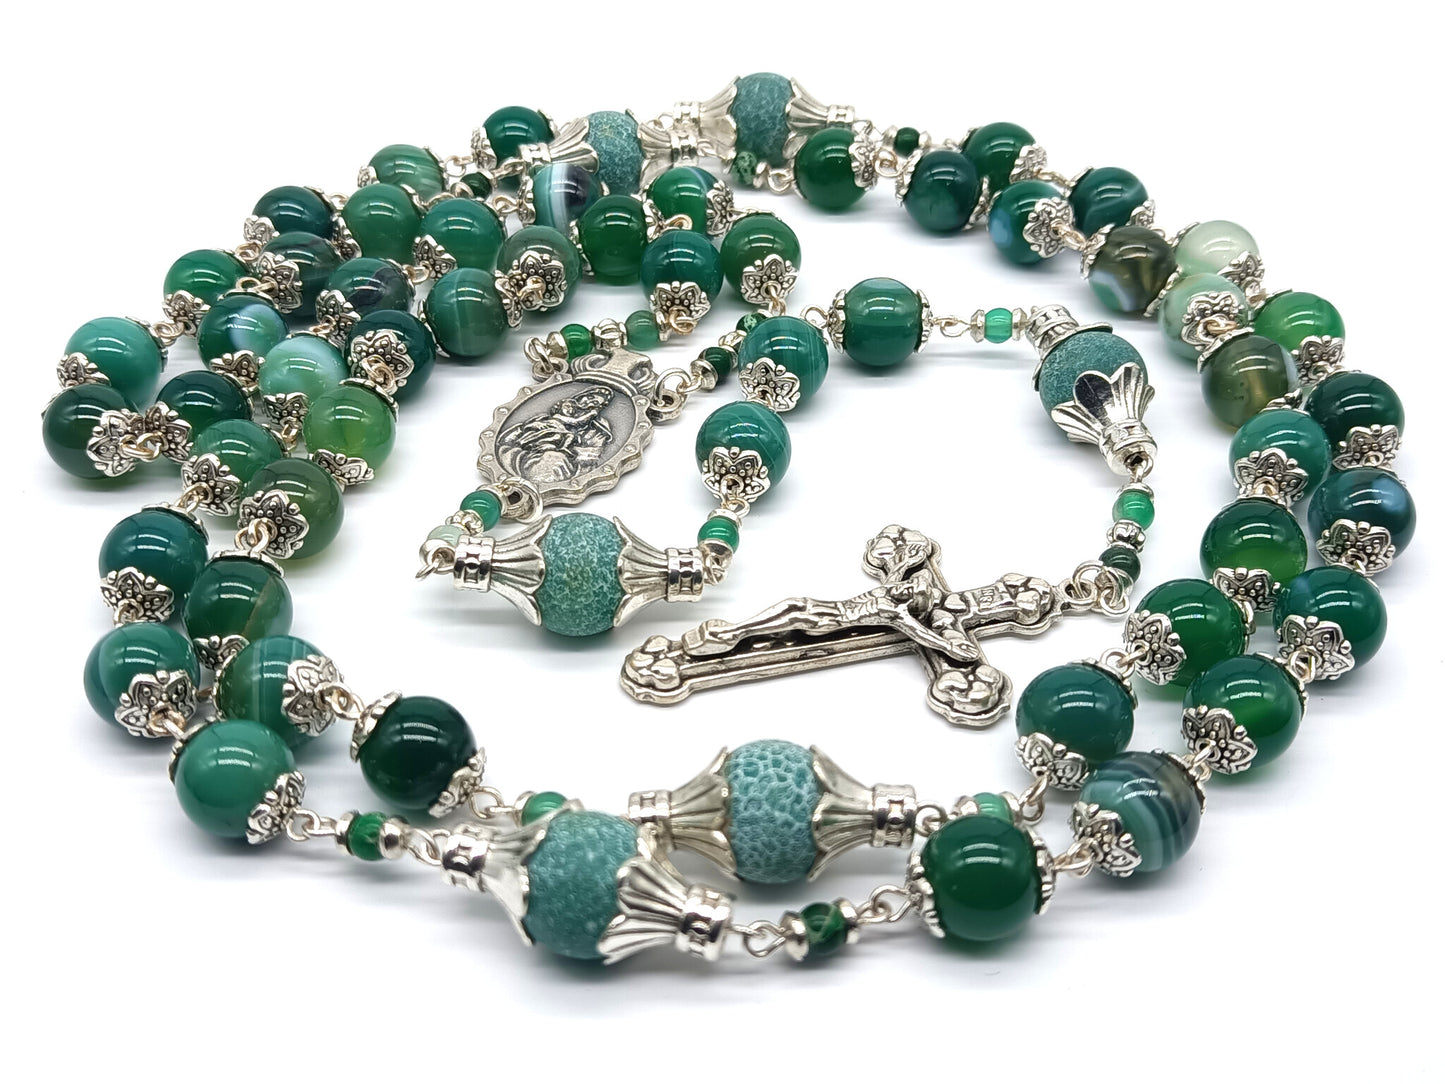 Virgin Mary unique rosary beads with green agate gemstone beads, silver bead caps, crucifix and centre medal.